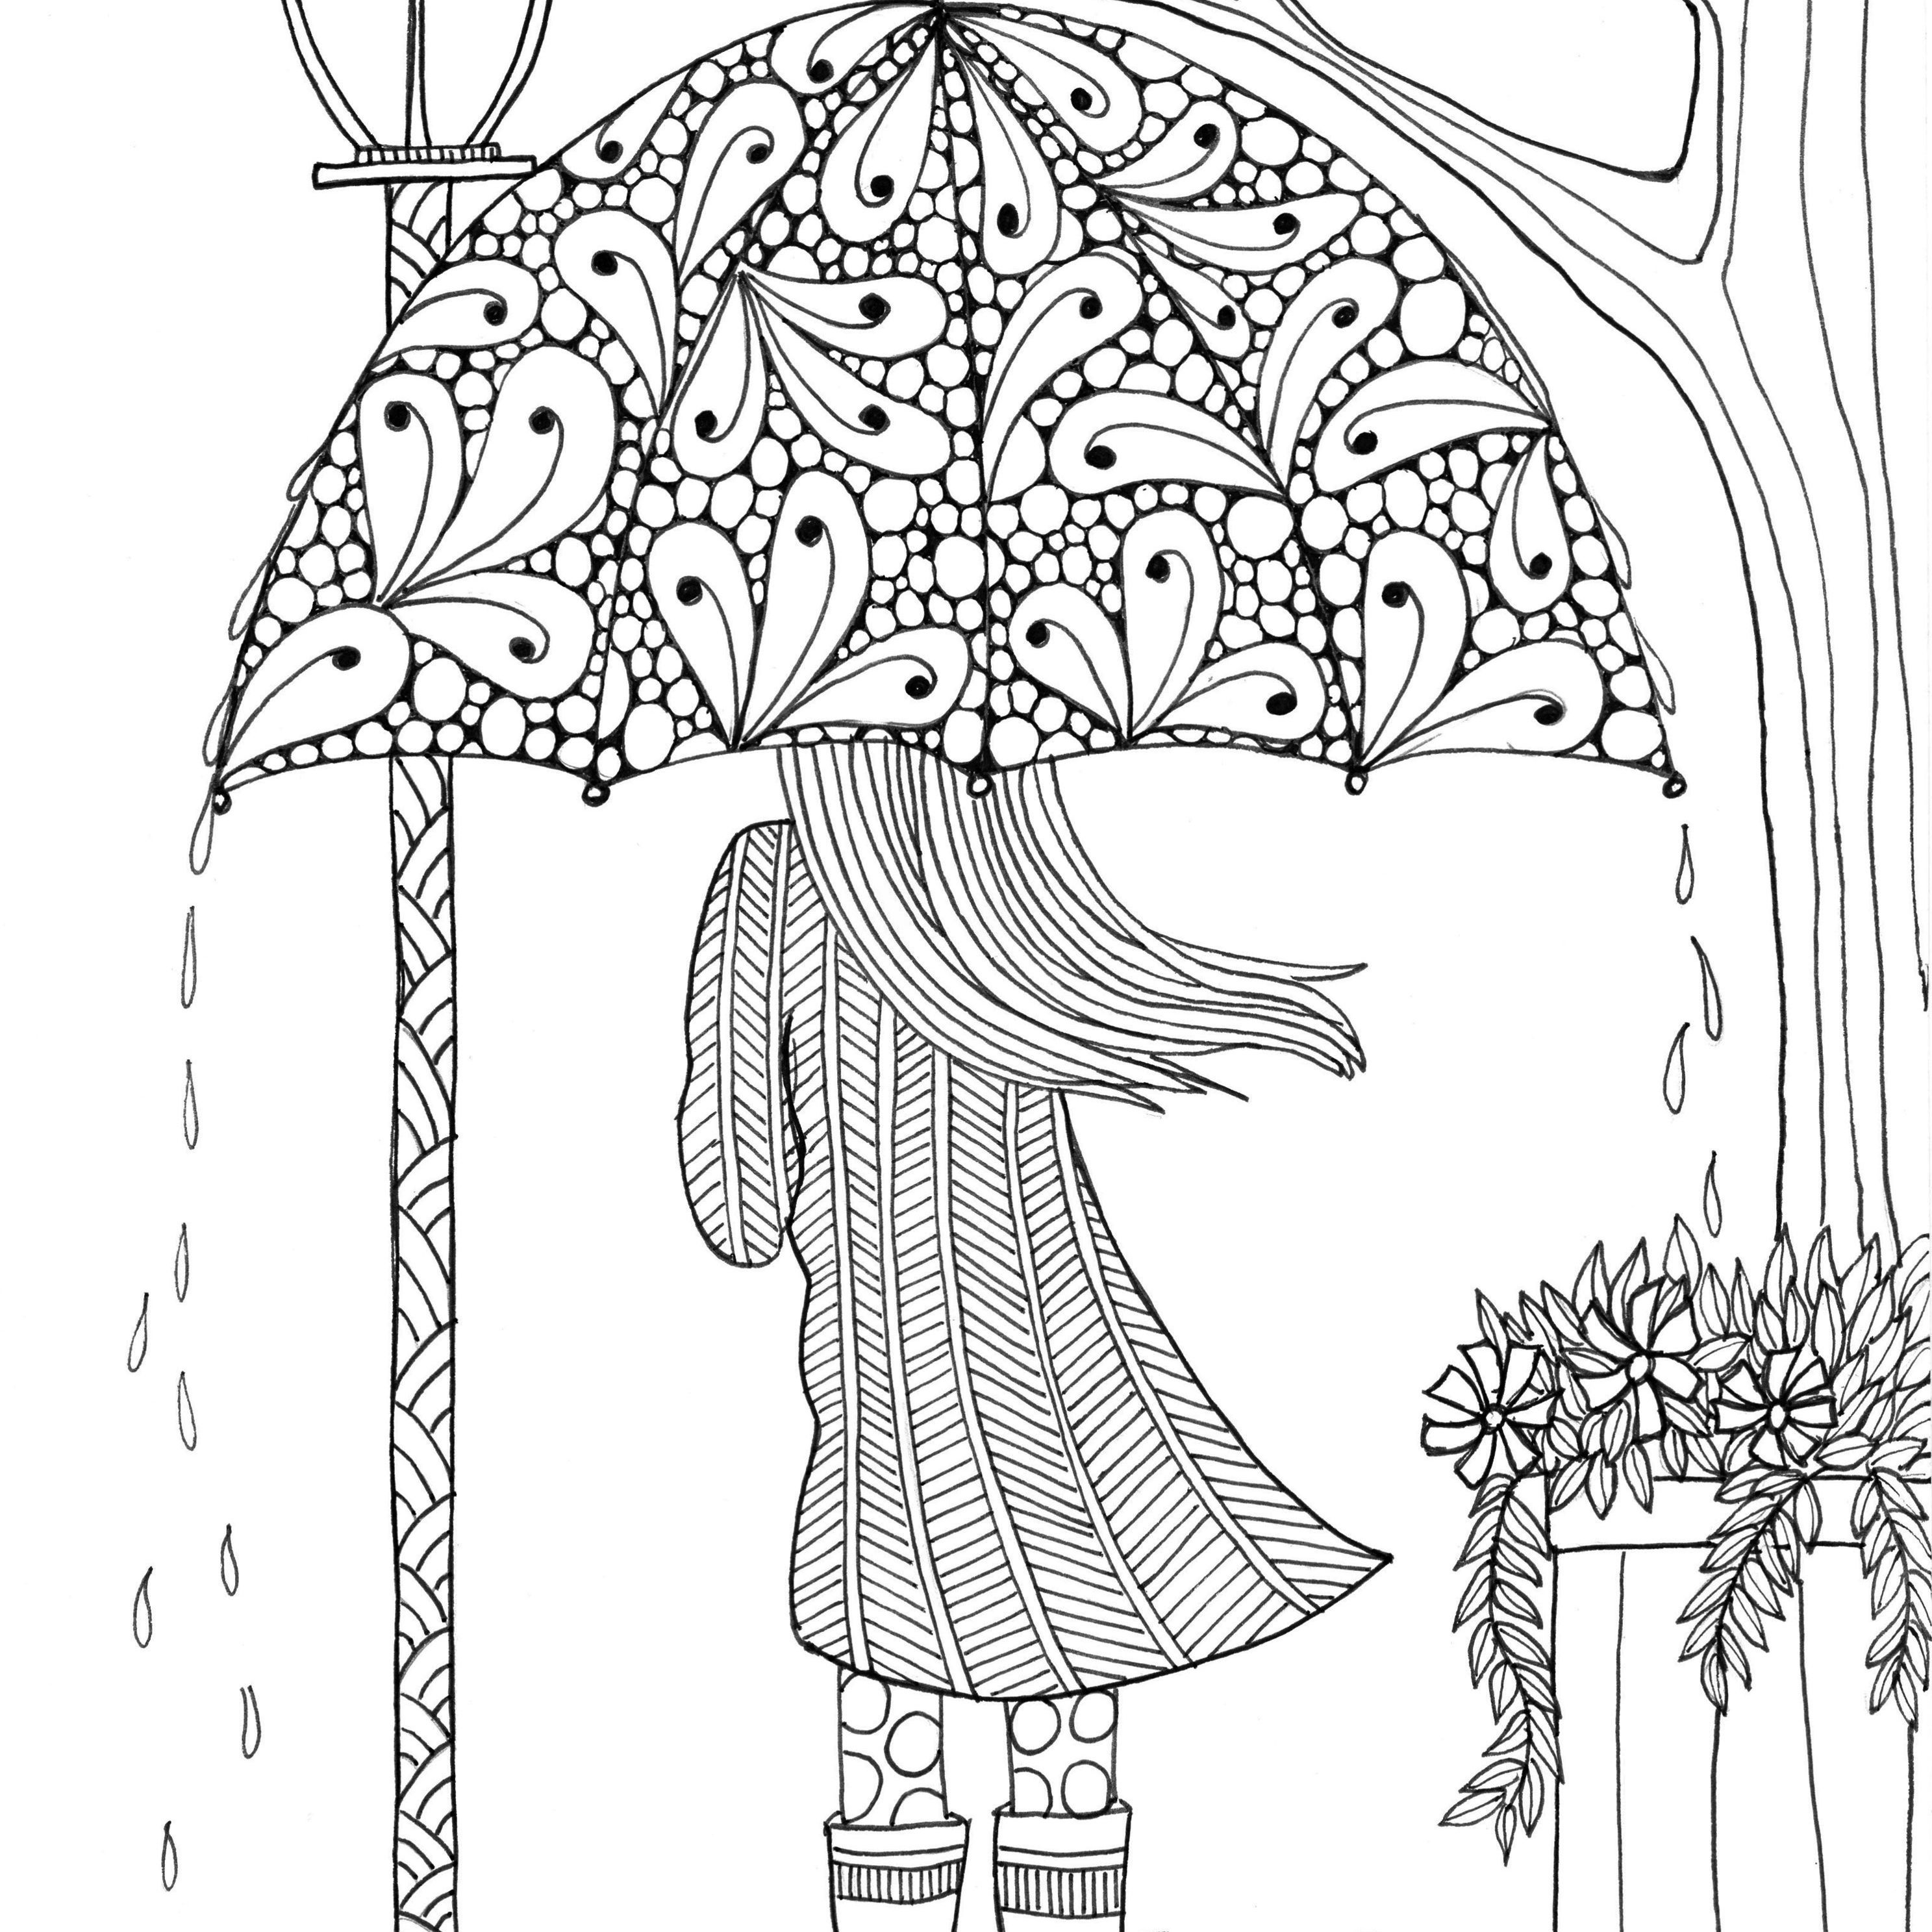 April Coloring Pages - Best Coloring Pages For Kids